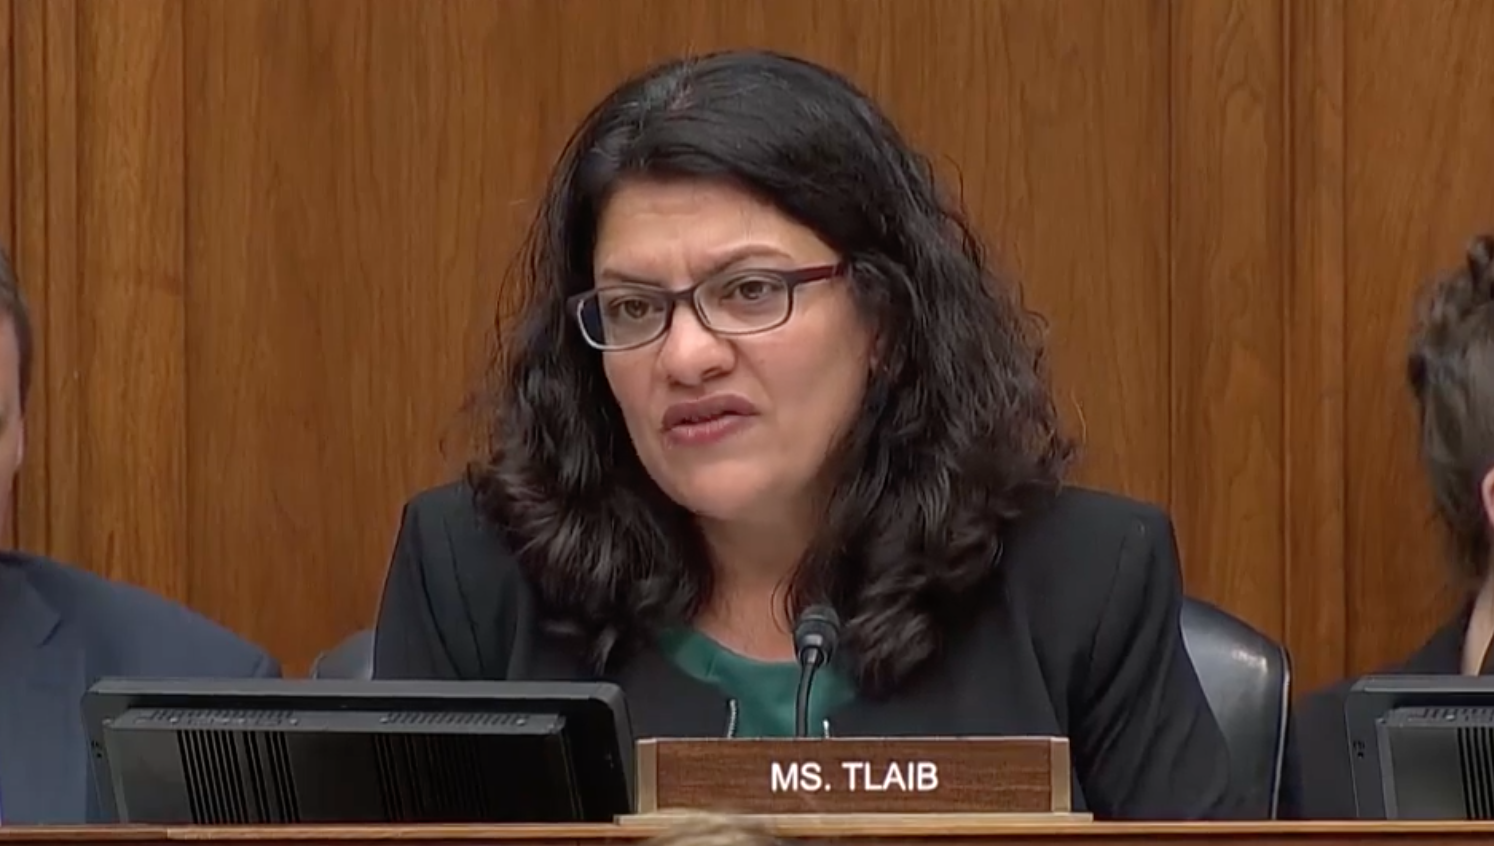 VIDEO: Rashida Tlaib demands term ‘illegal’ not be used for migrants